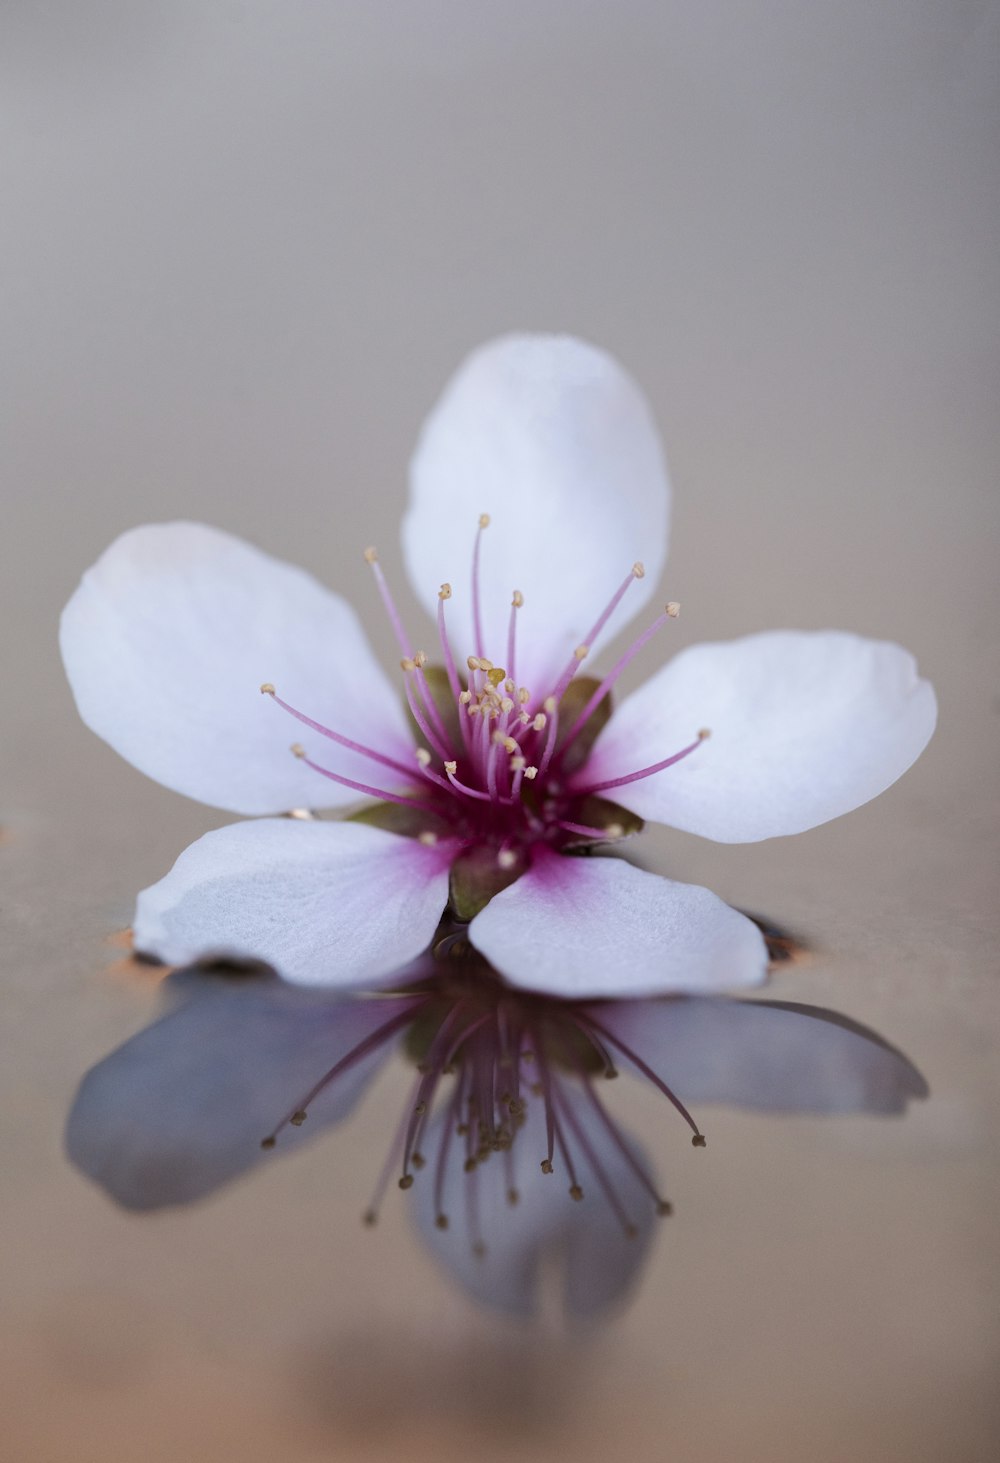 a white flower with a pink center sitting on top of a body of water